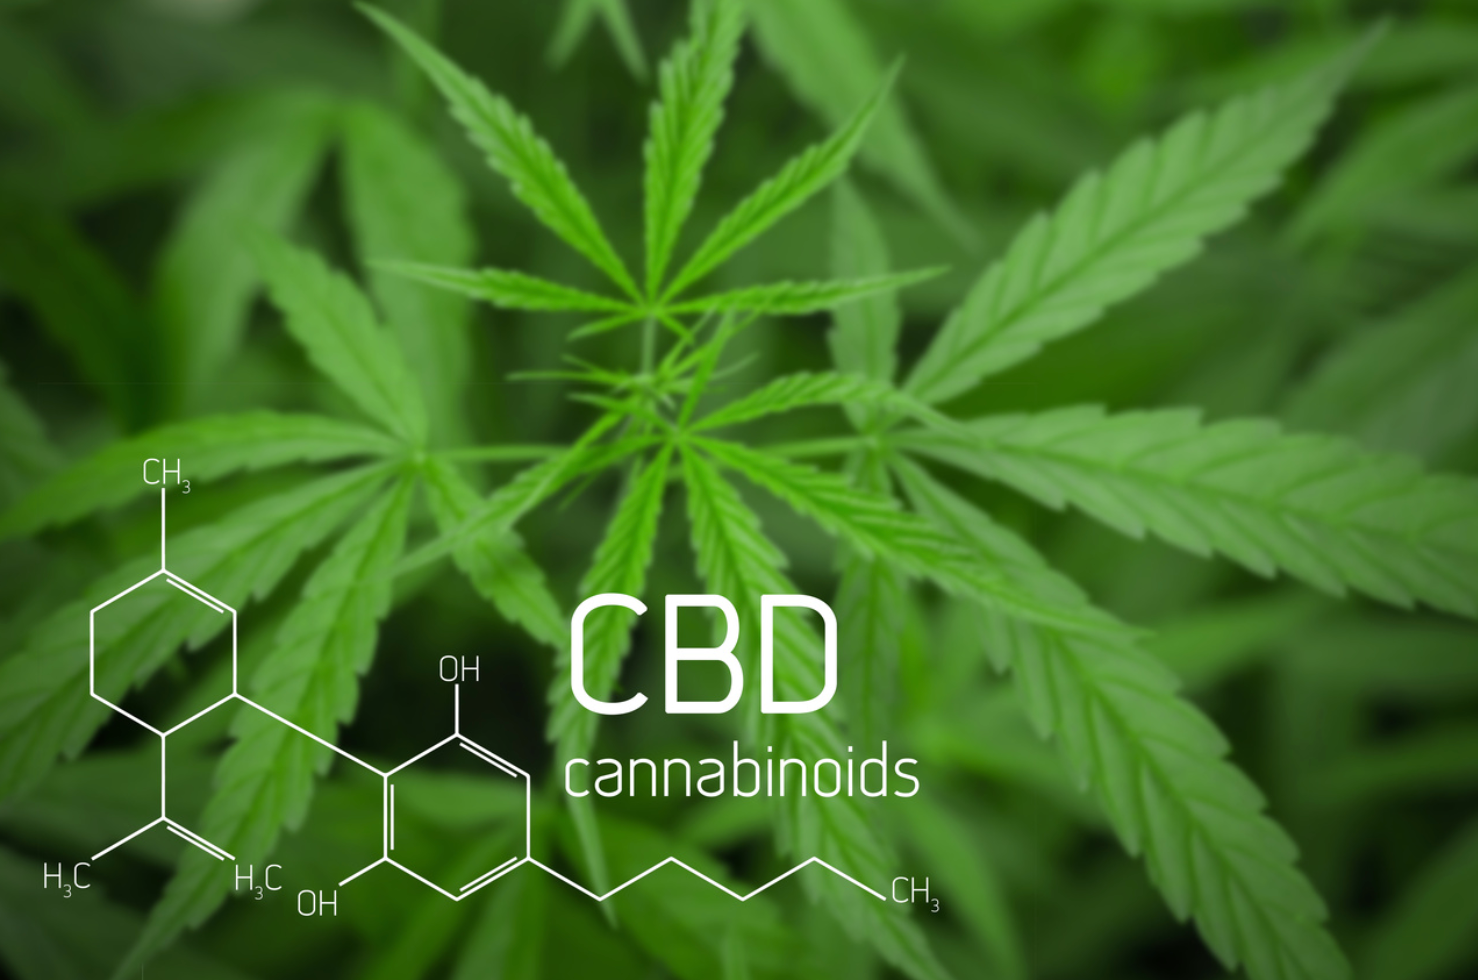 Inaccurate Labeling, Misleading Claims Found Among CBD Products